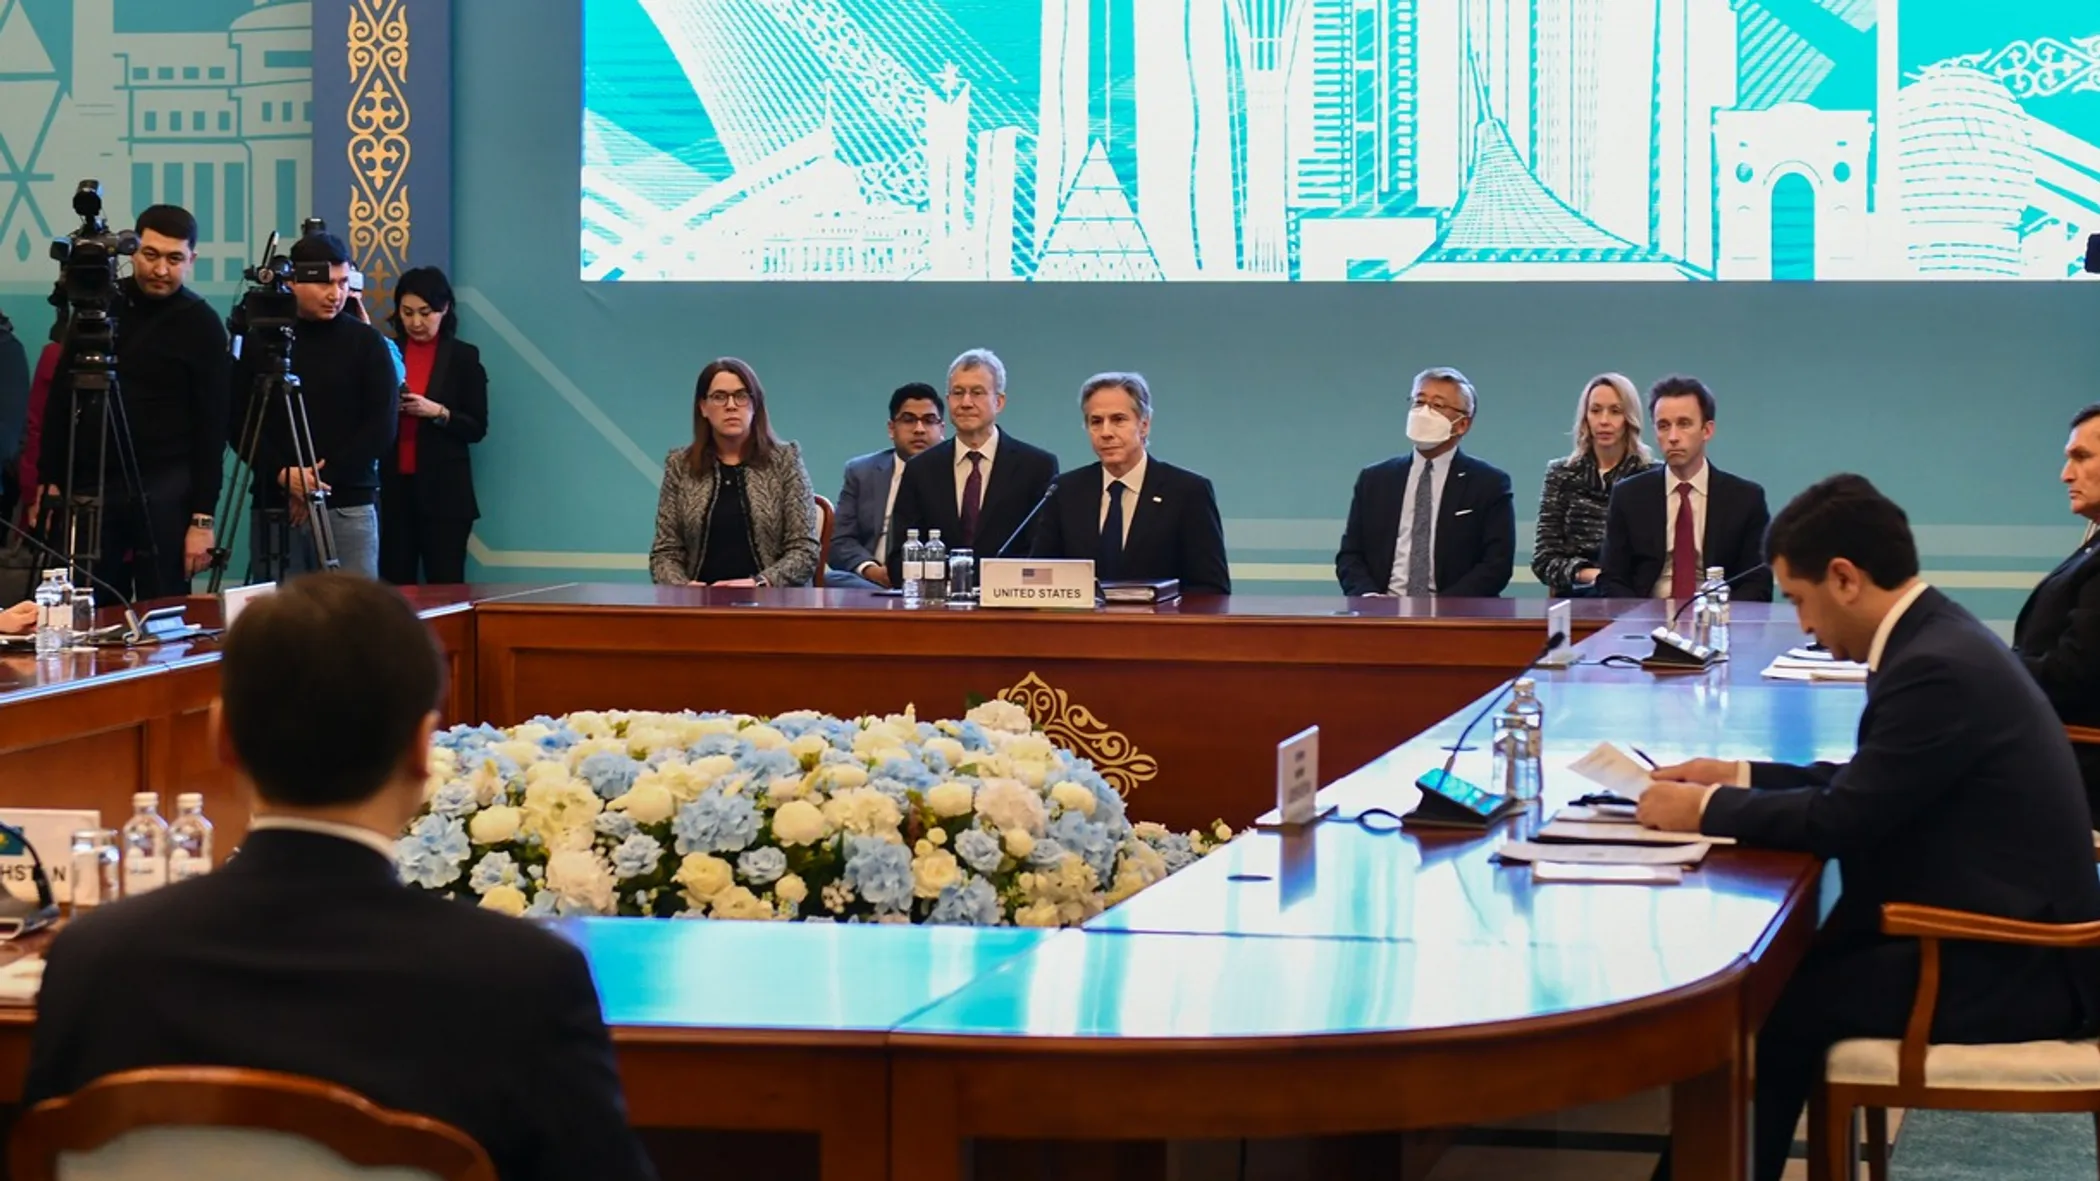 U.S. and Central Asia hold talks about cooperation at C5+1 diplomatic summit in Astana. MFA